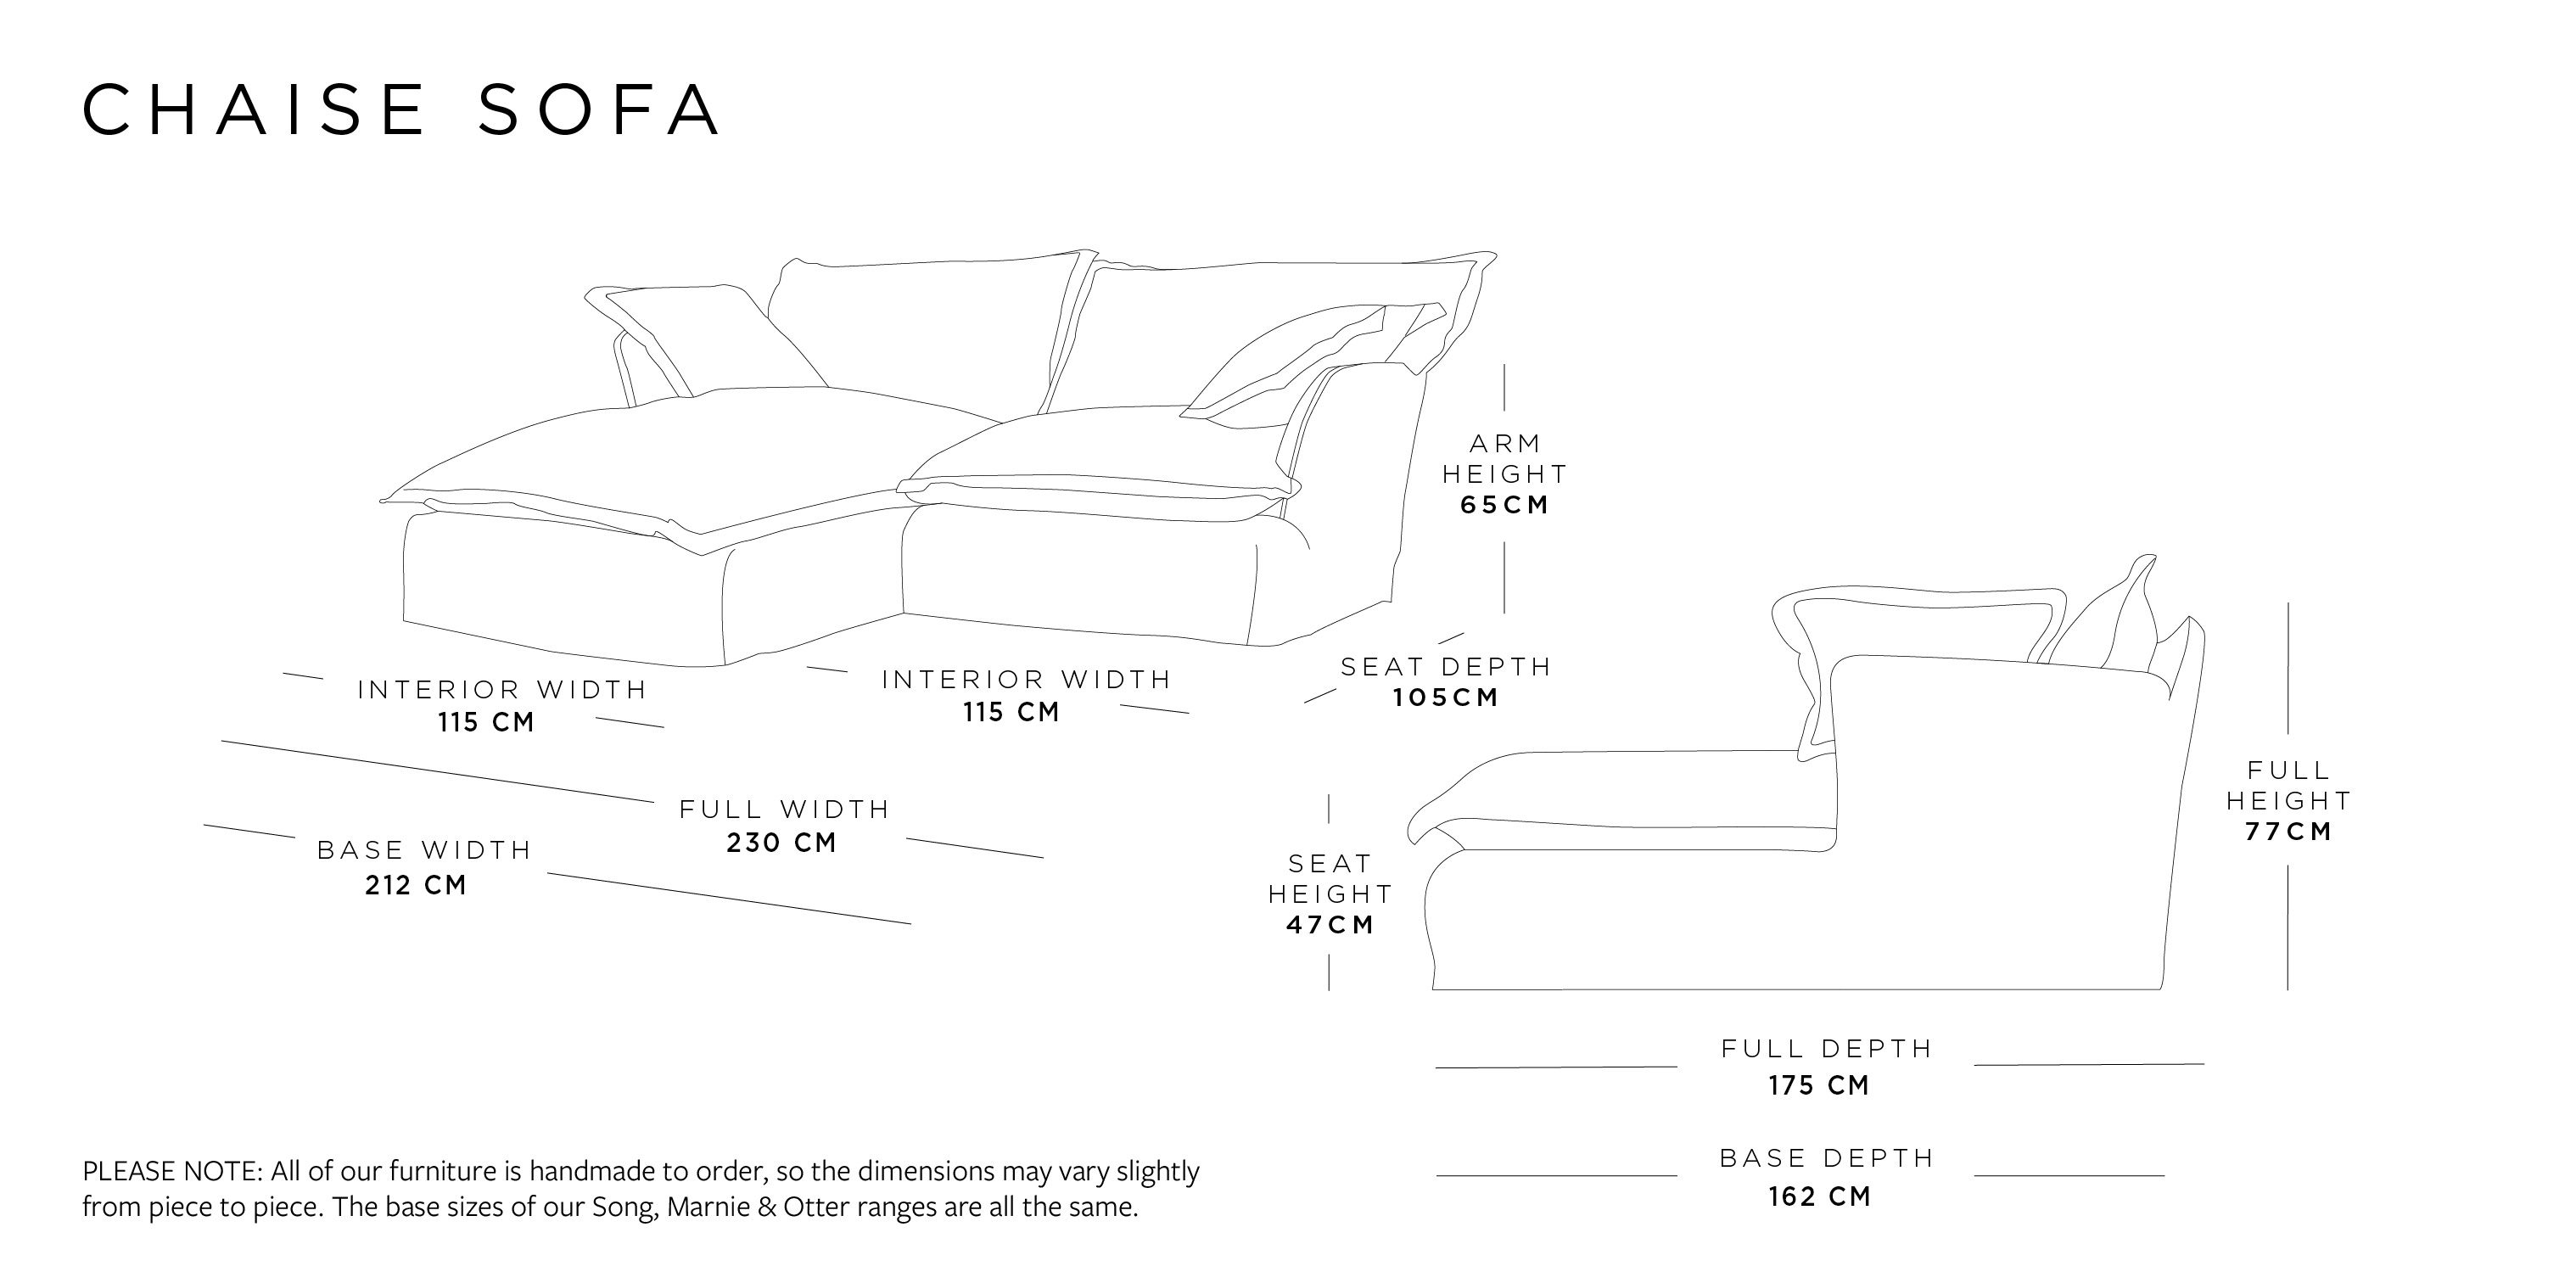 Chaise Sofa | Otter Range Size Guide